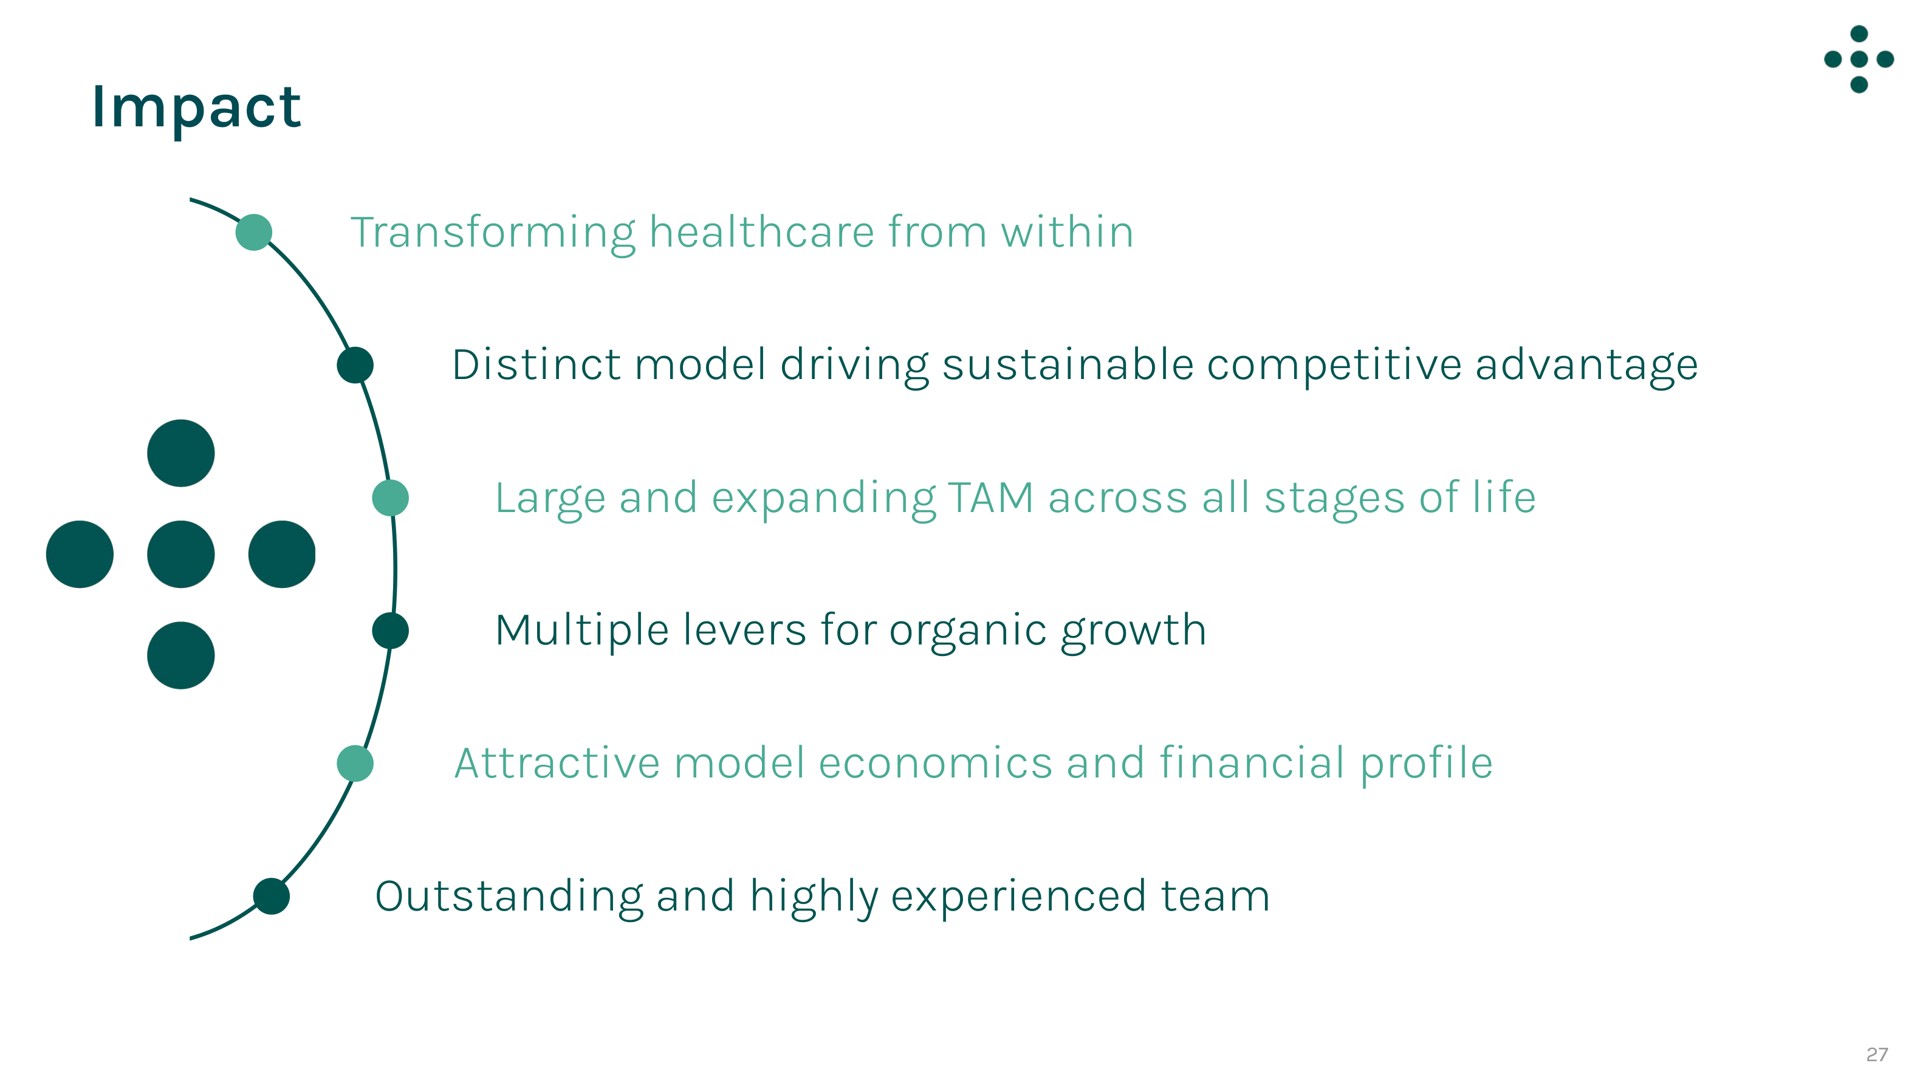 impact transforming from within distinct model driving sustainable competitive advantage large and expanding tam across all stages of life multiple levers for organic growth attractive model economics and pro outstanding and highly experienced team | One Medical